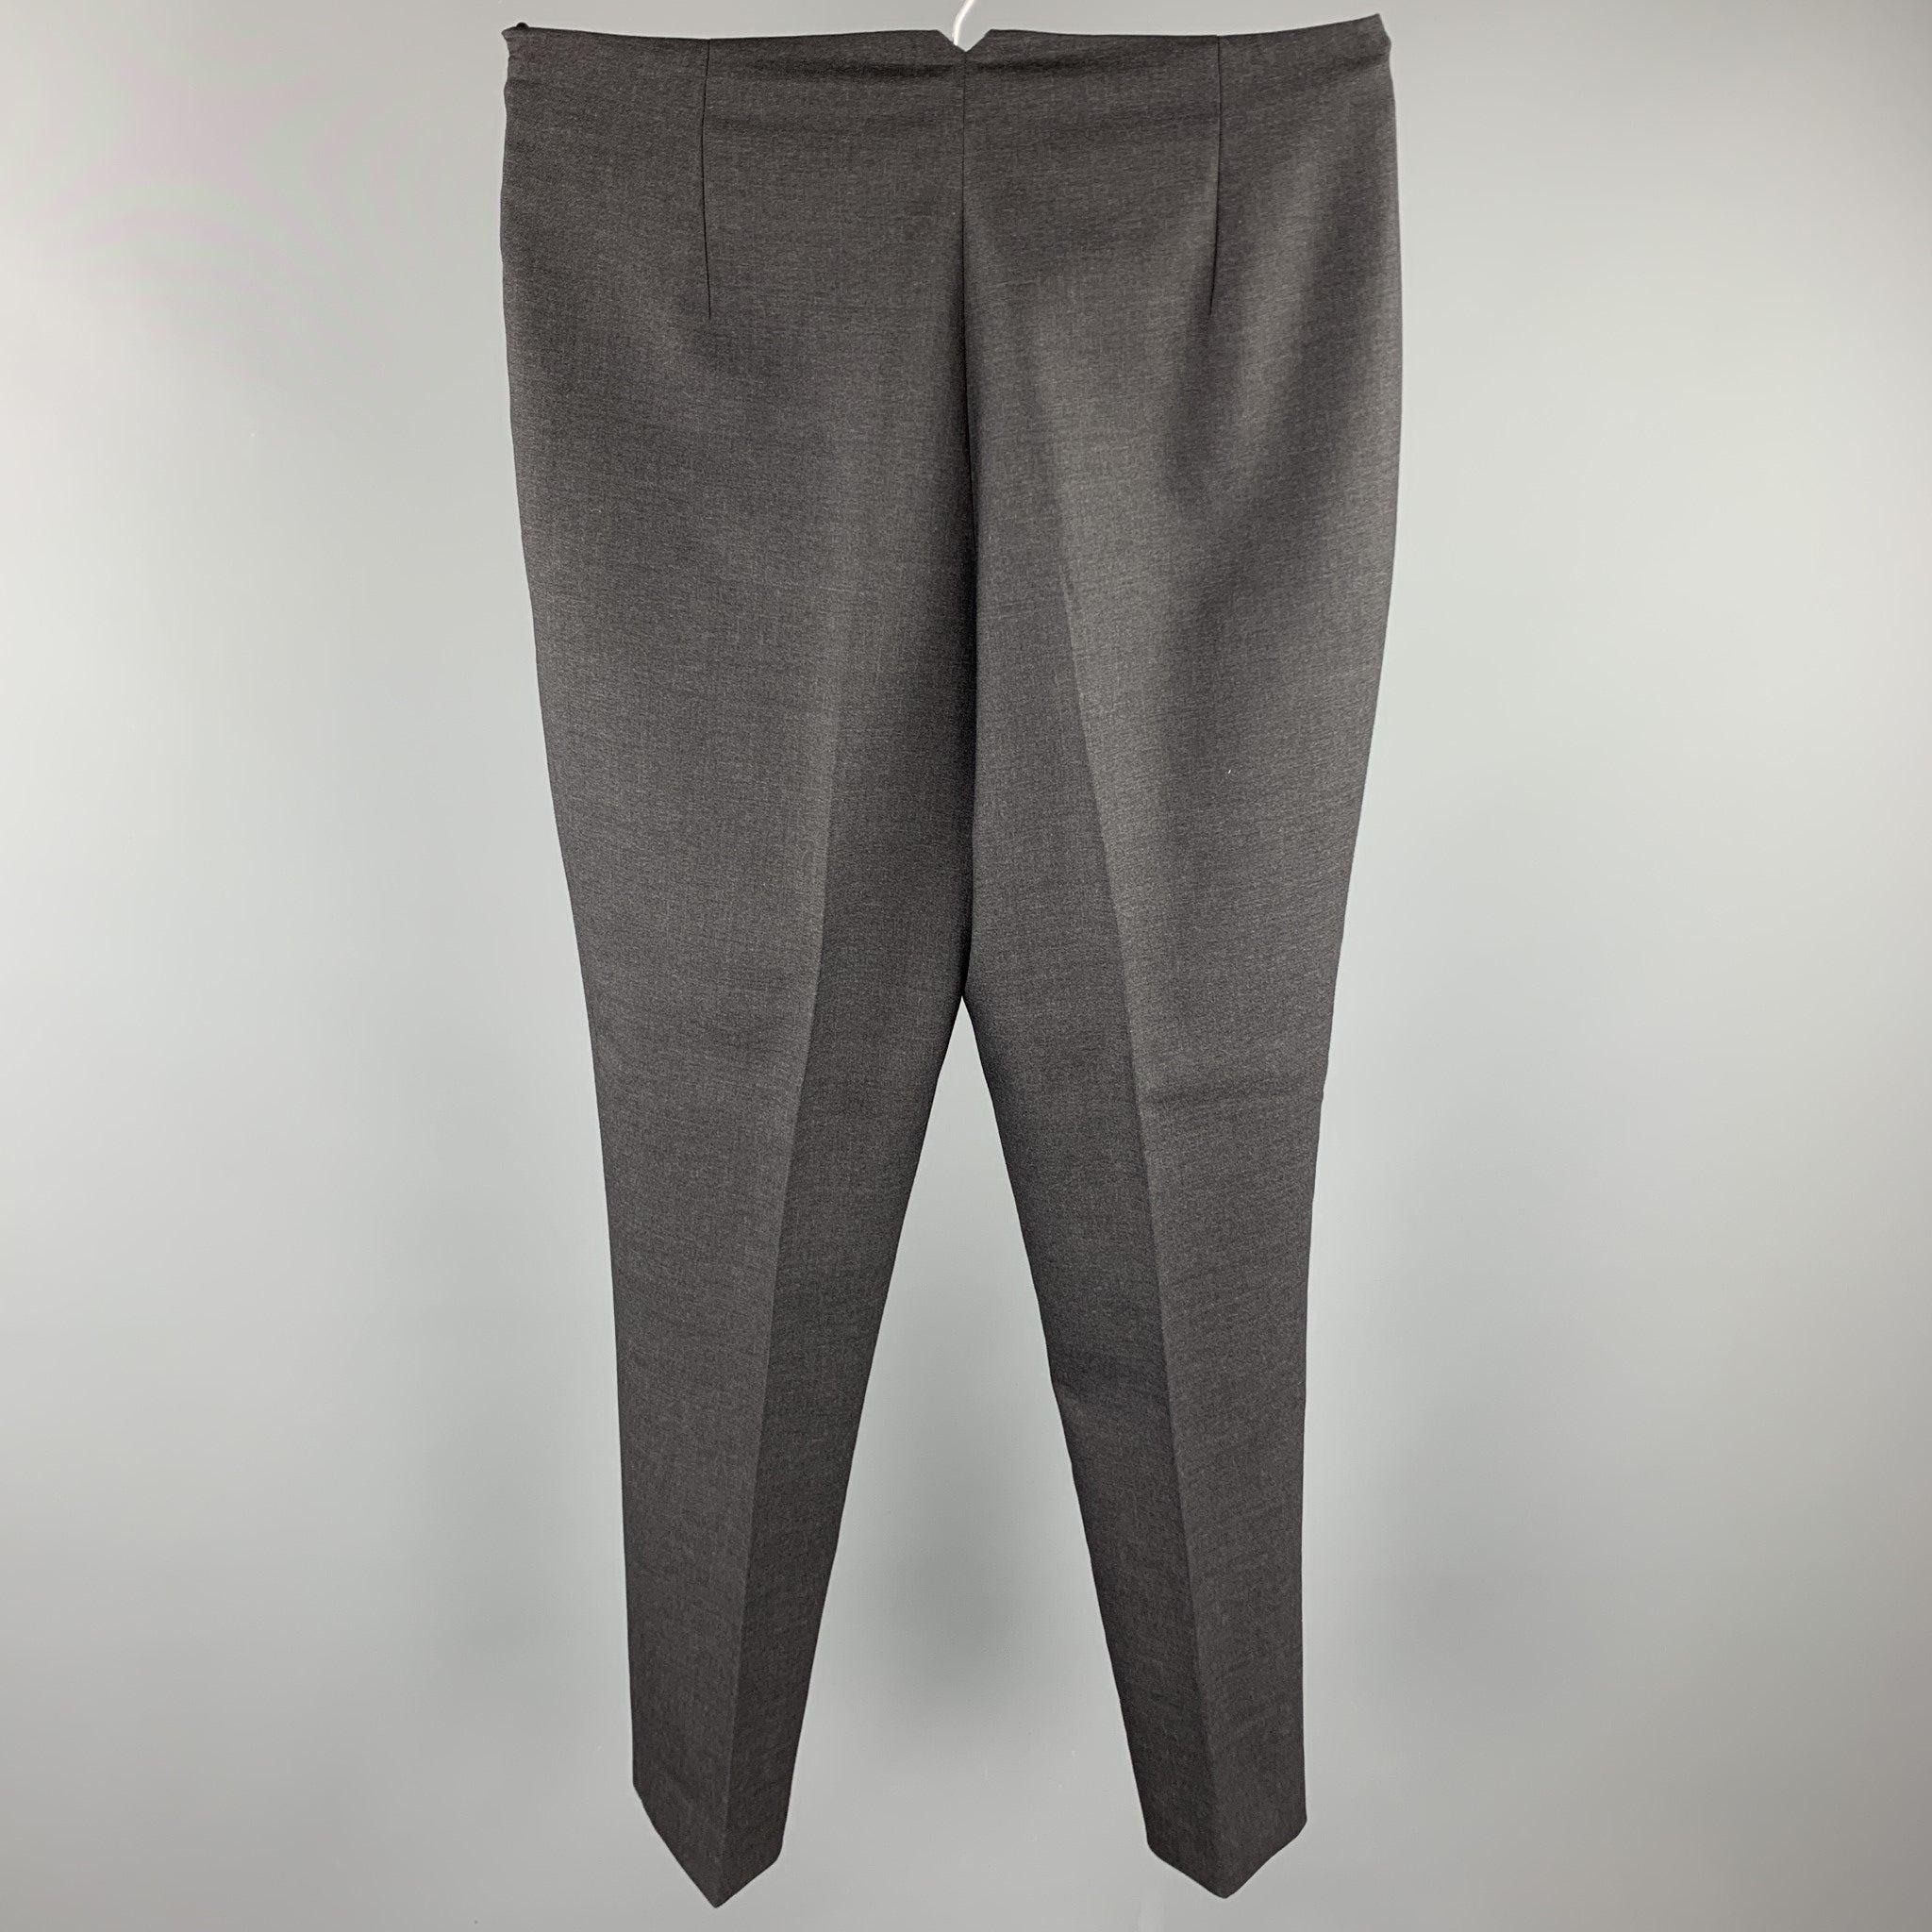 RALPH LAUREN COLLECTION Size 4 Grey Pleated Dress Pants In Good Condition For Sale In San Francisco, CA